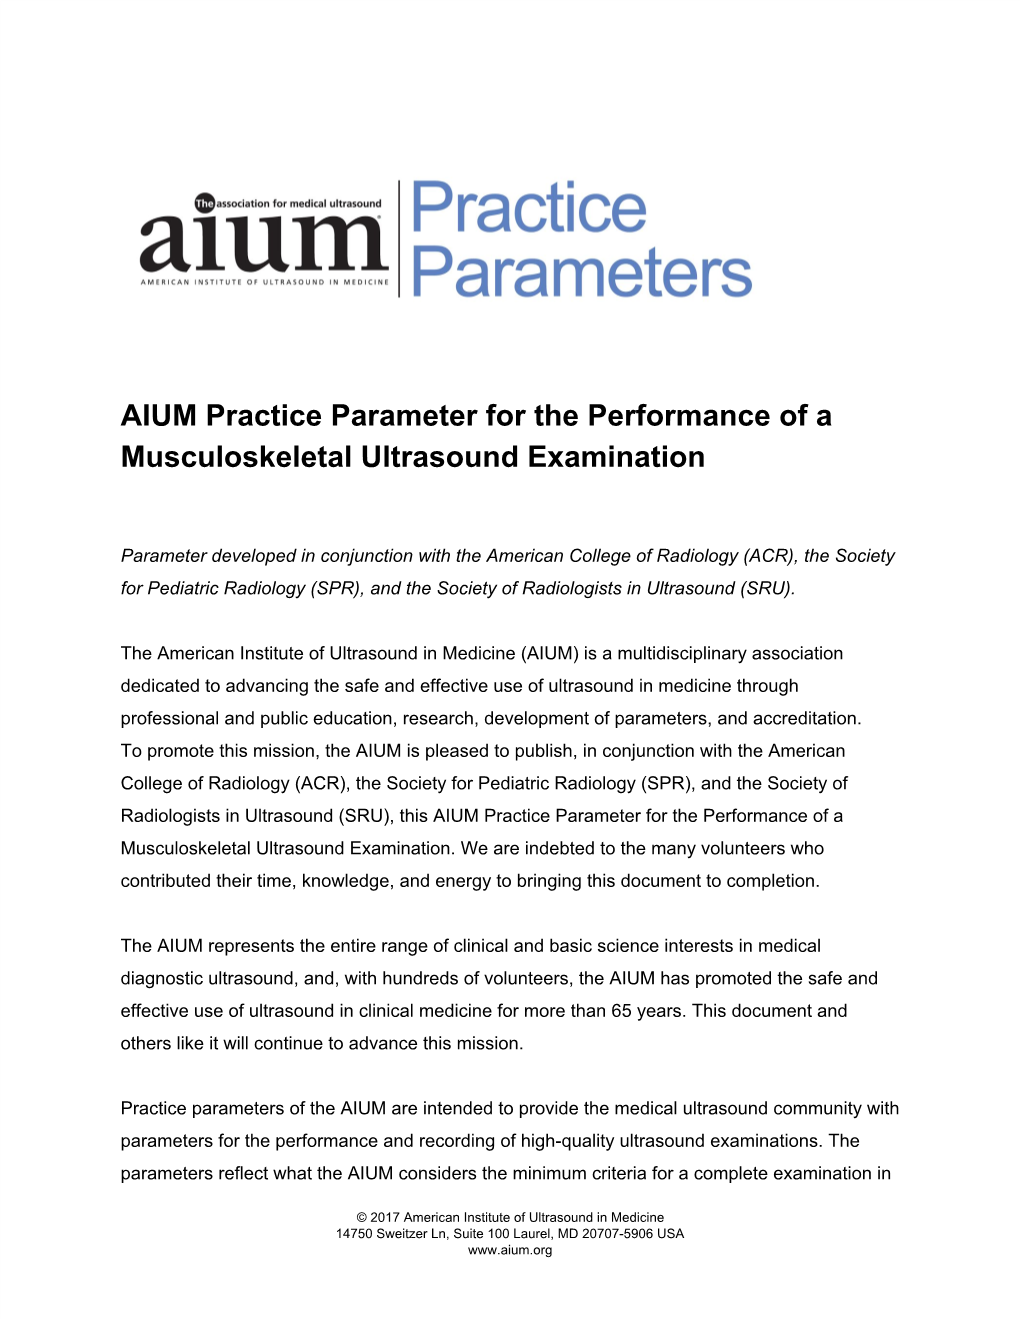 AIUM Practice Parameter for the Performance of a Musculoskeletal Ultrasound Examination